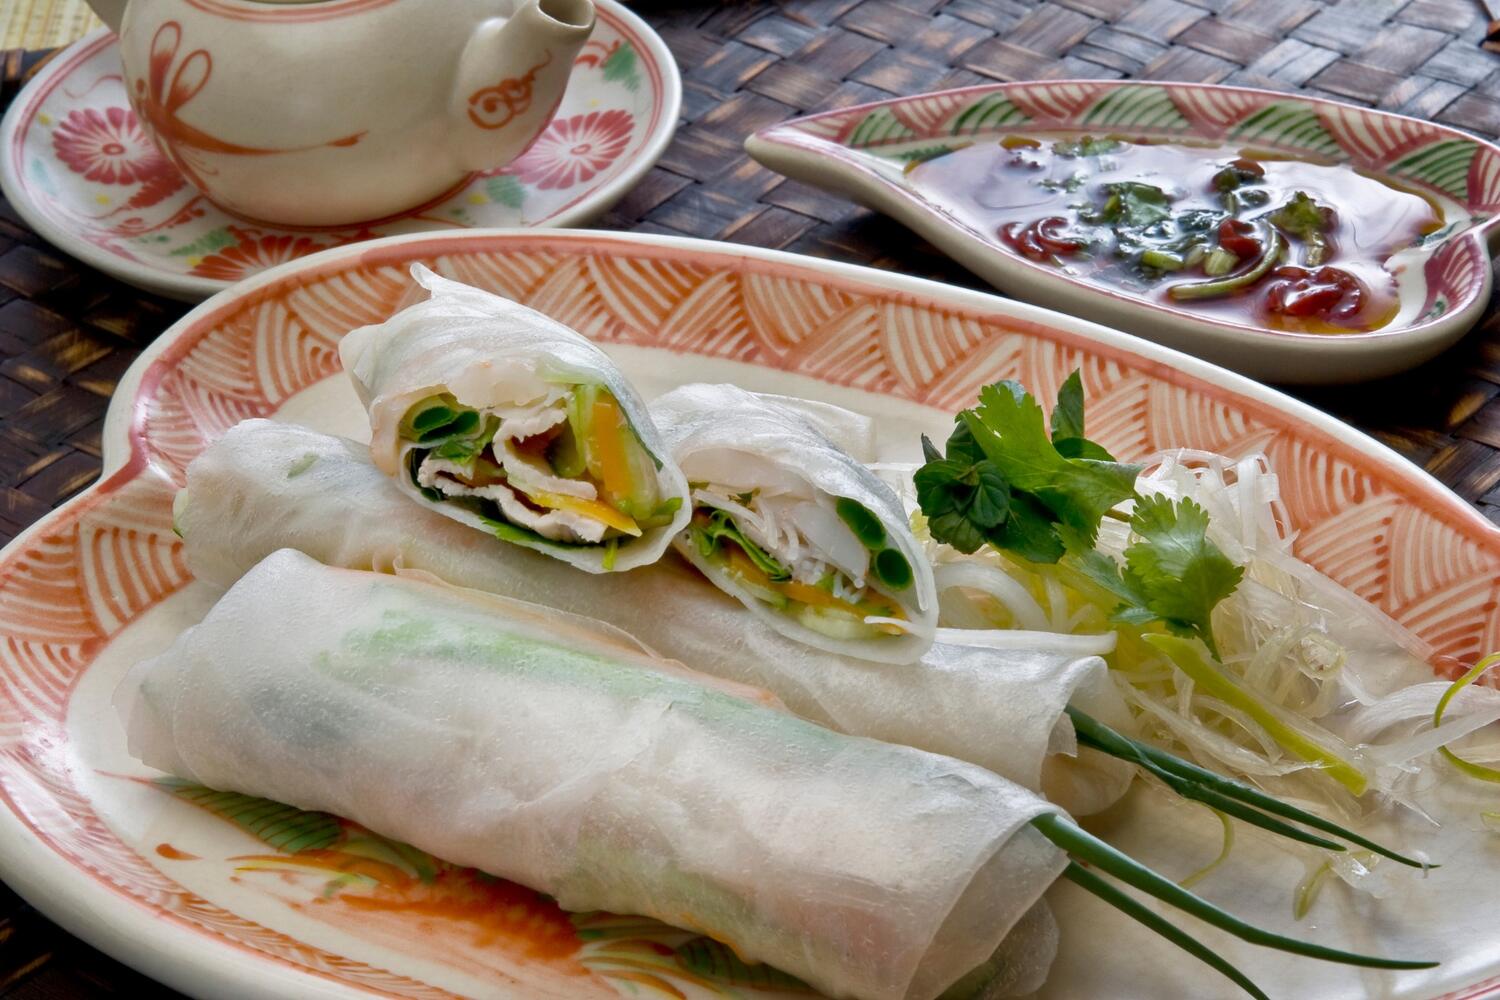 Fresh spring rolls beside dipping sauce on a plate garnished with herbs.